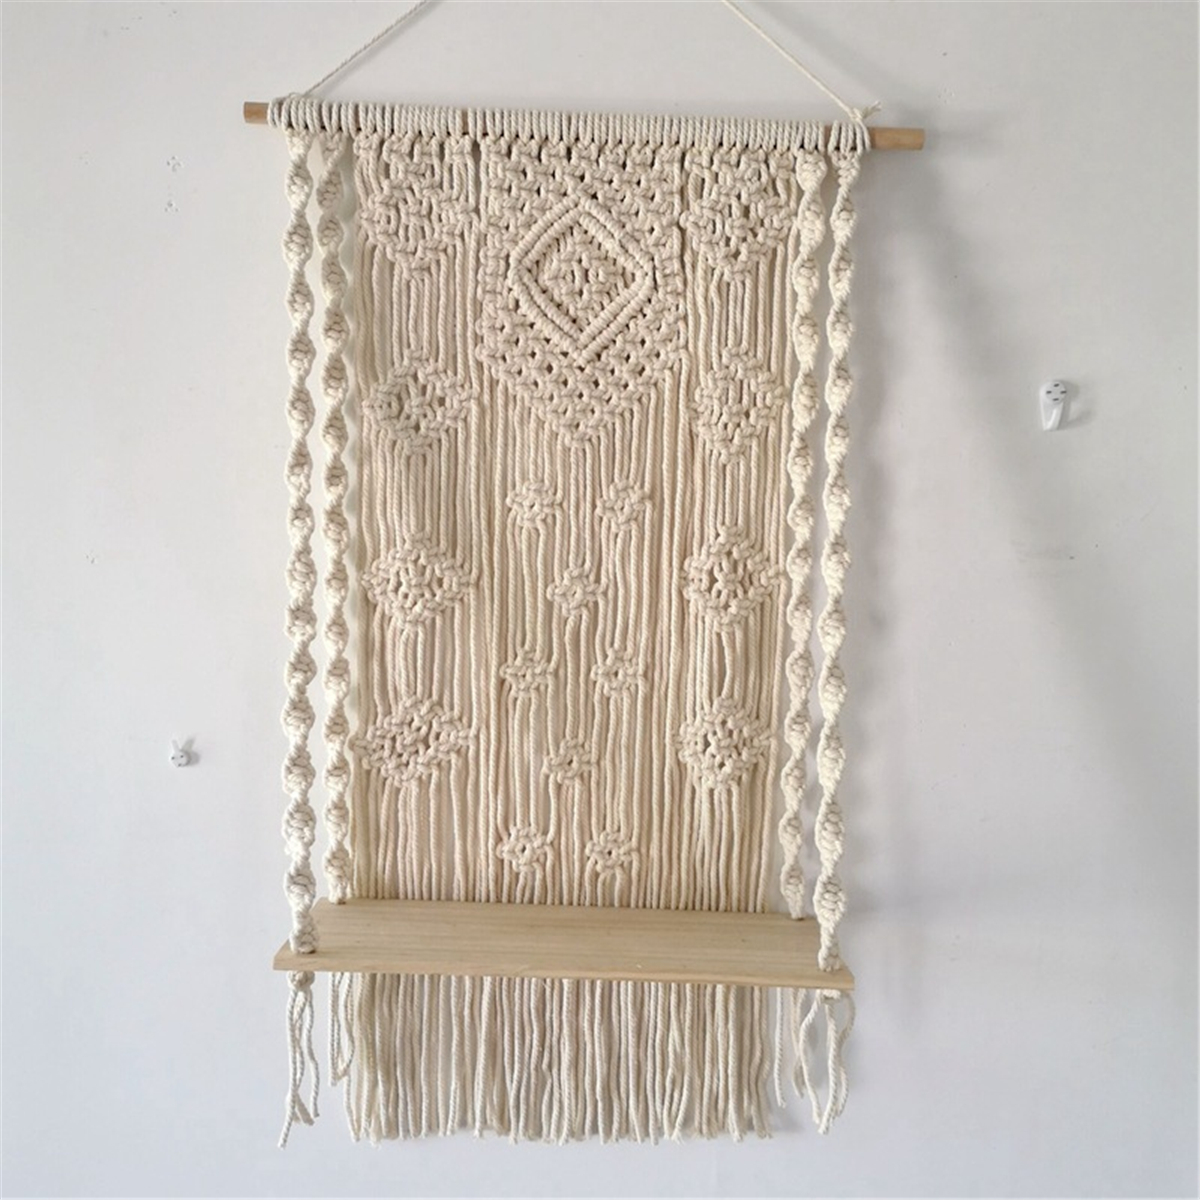 Wall-Hanging-Rack-Macrame-Knitted-Rope-Woven-Tassel-Wall-Hanging-Handmade-Tapestry-Display-Stand-Hom-1795856-6